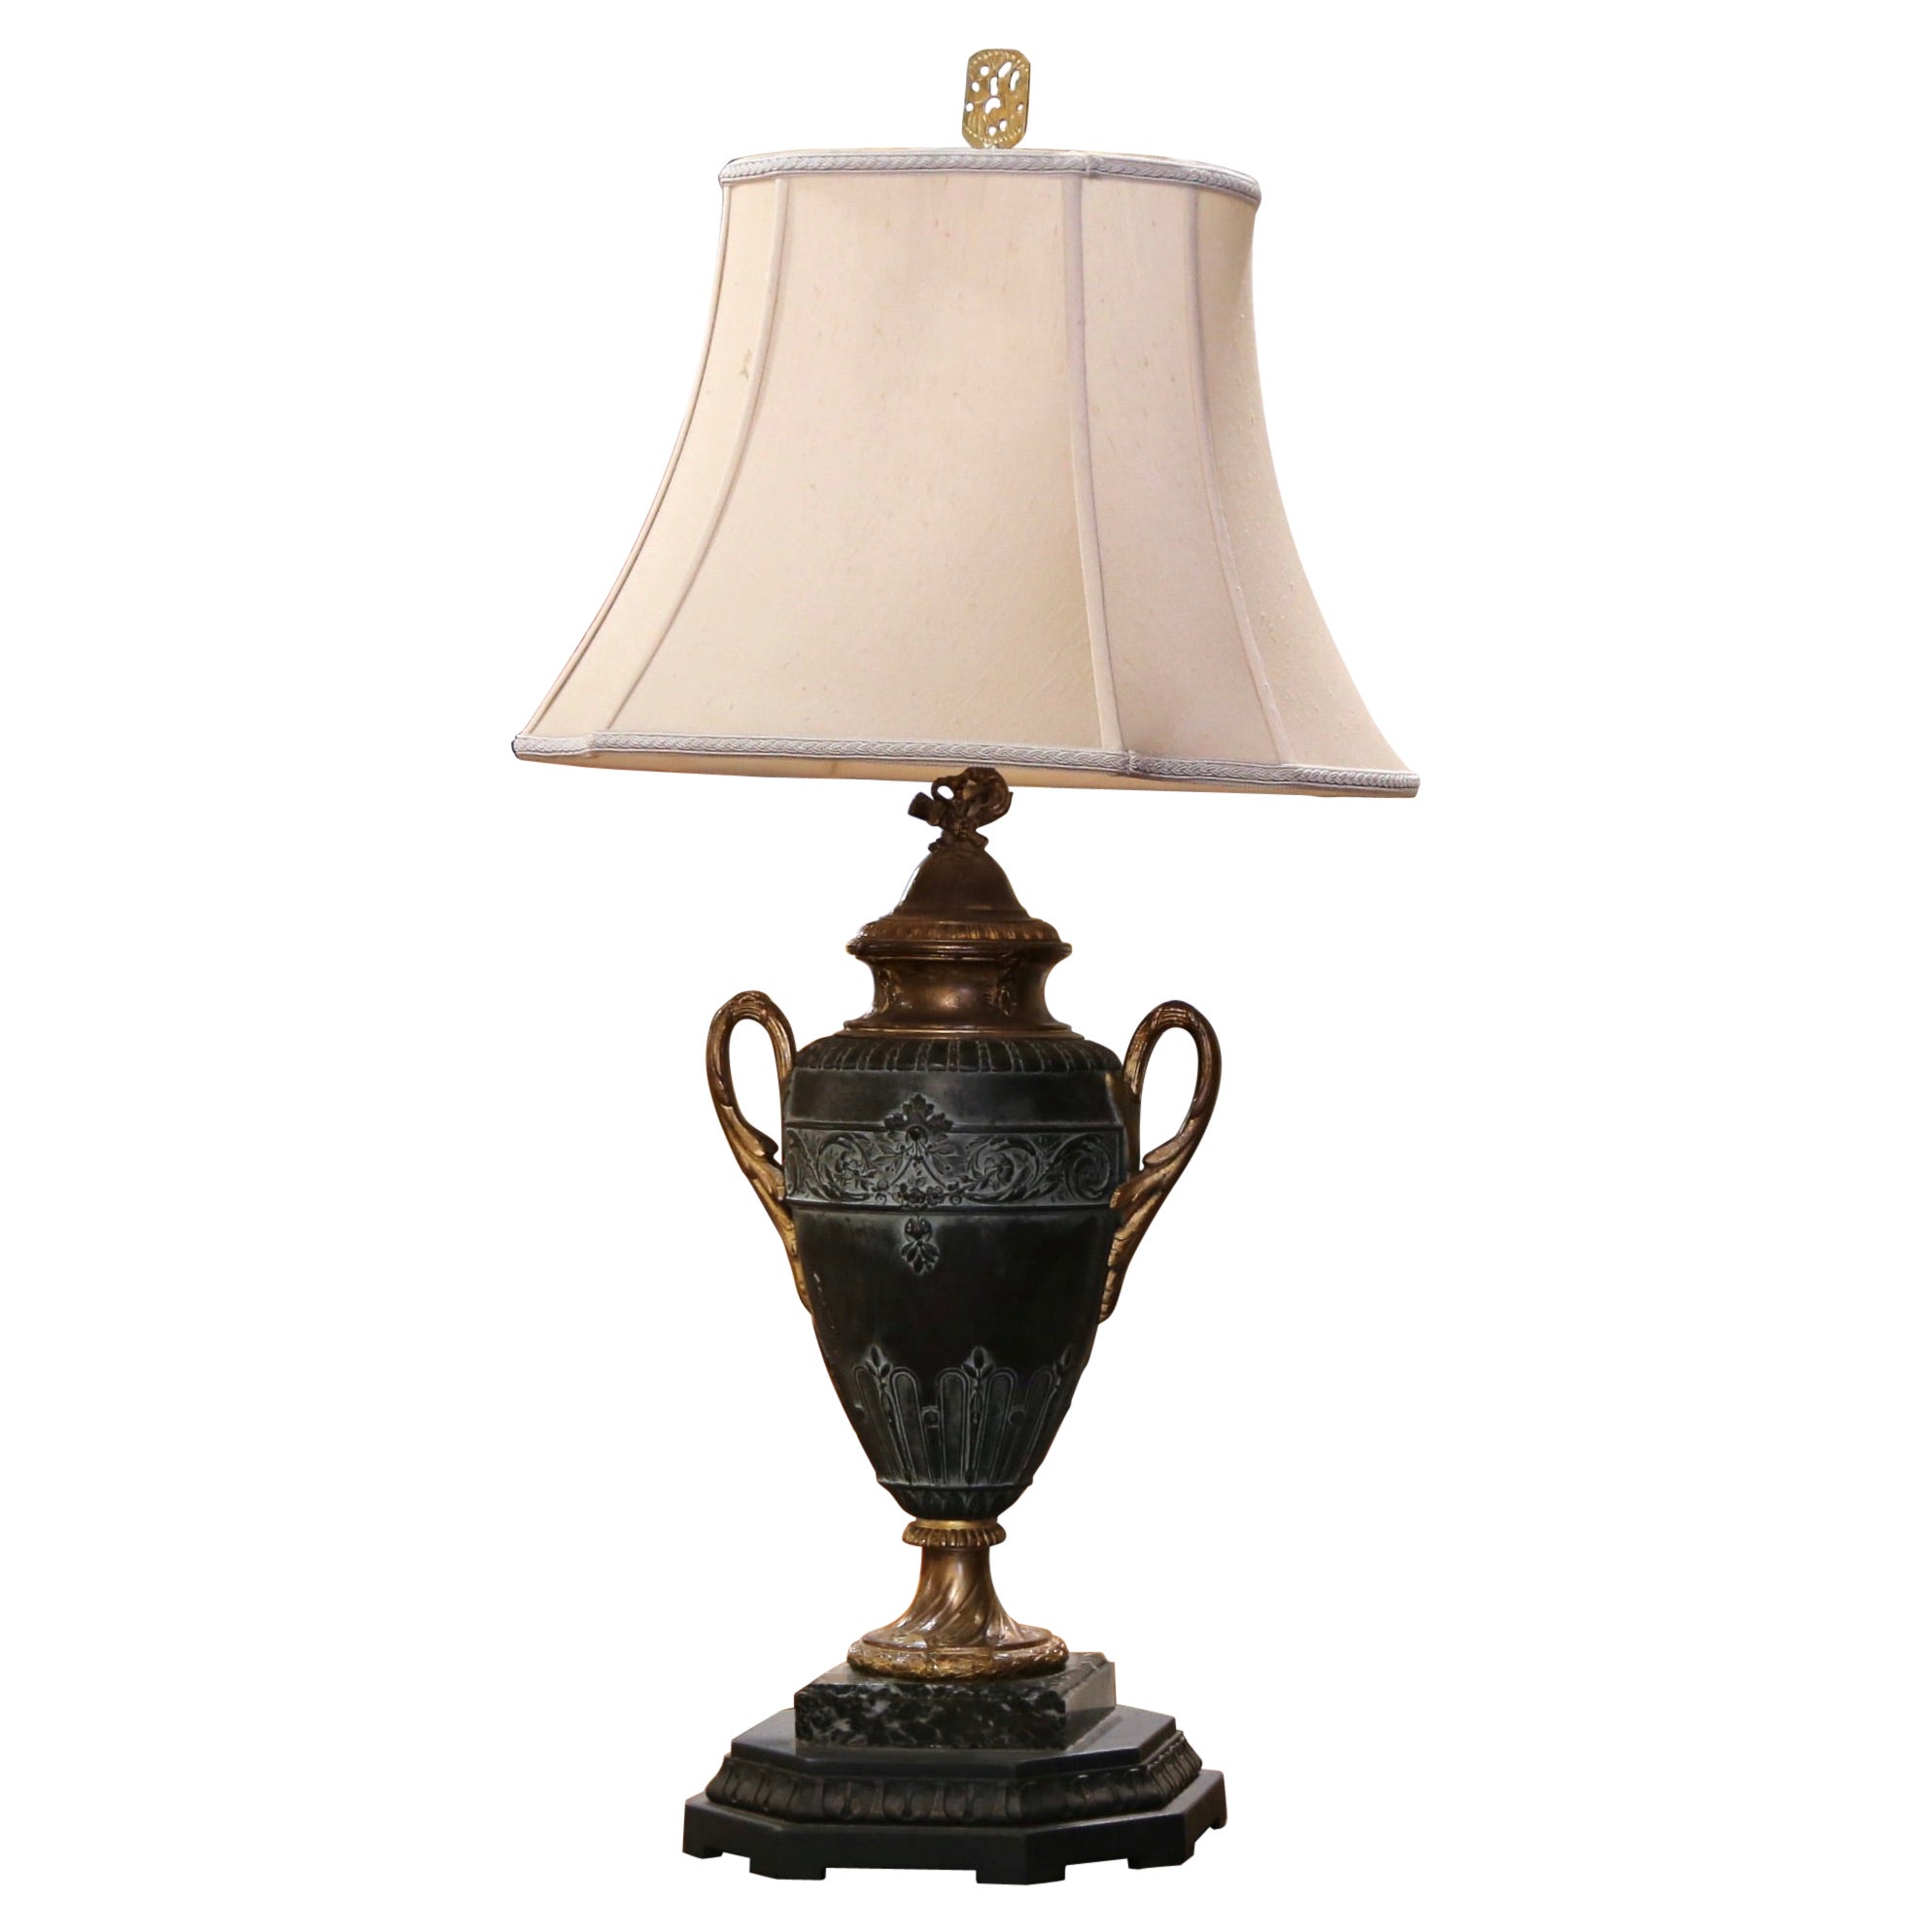 19th Century French Spelter Urn-Form on Marble Base Table Lamp